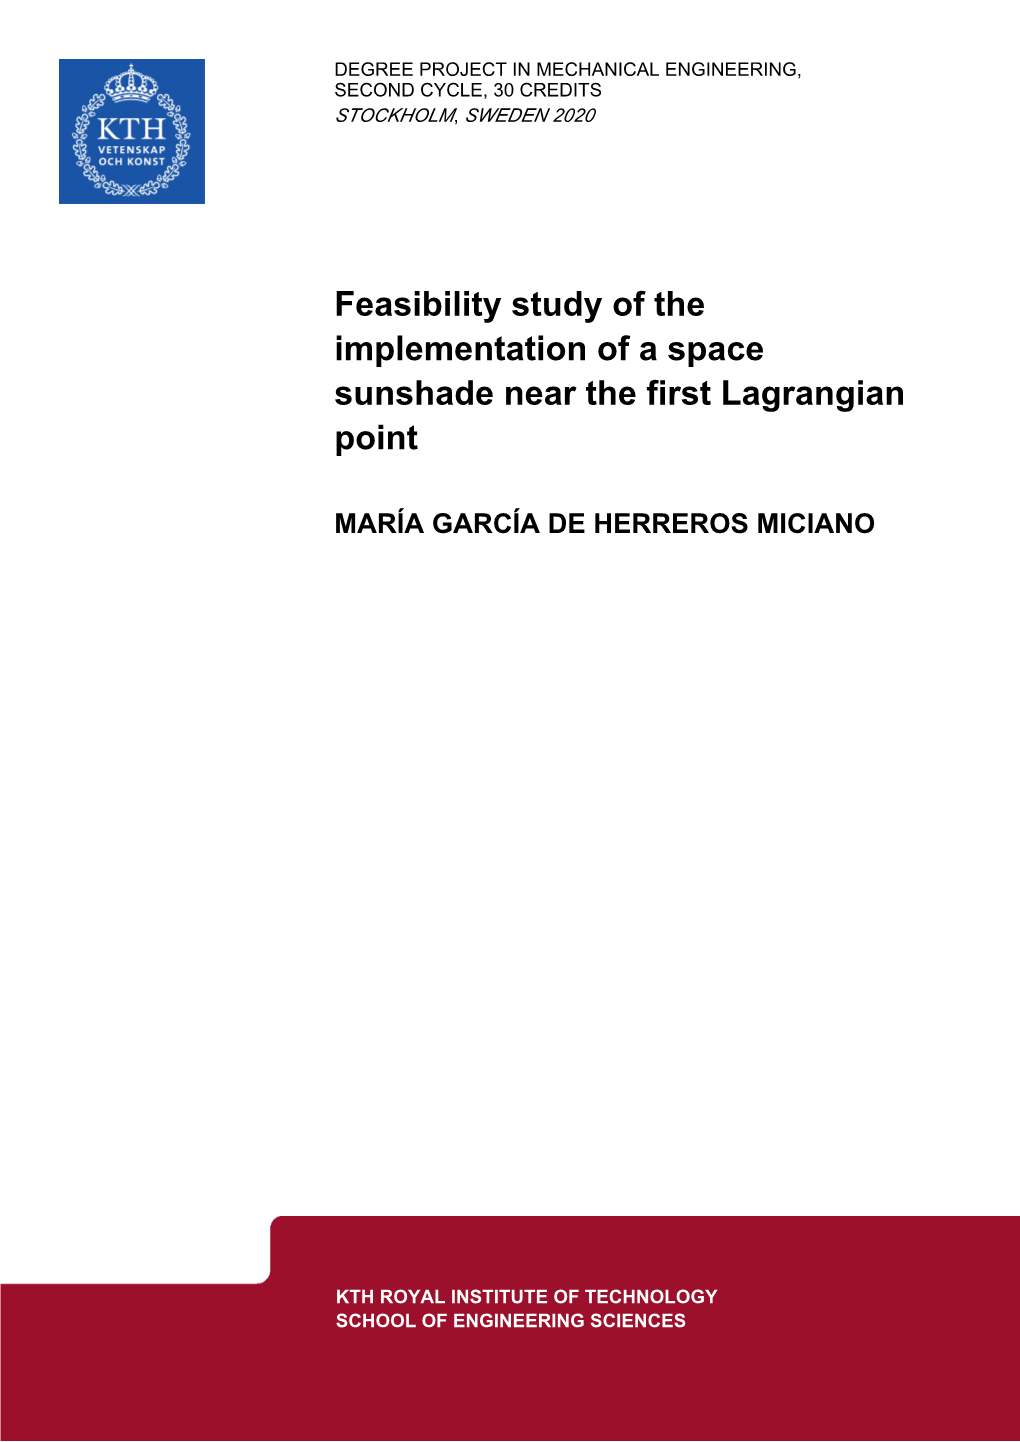 Feasibility Study of the Implementation of a Space Sunshade Near the First Lagrangian Point